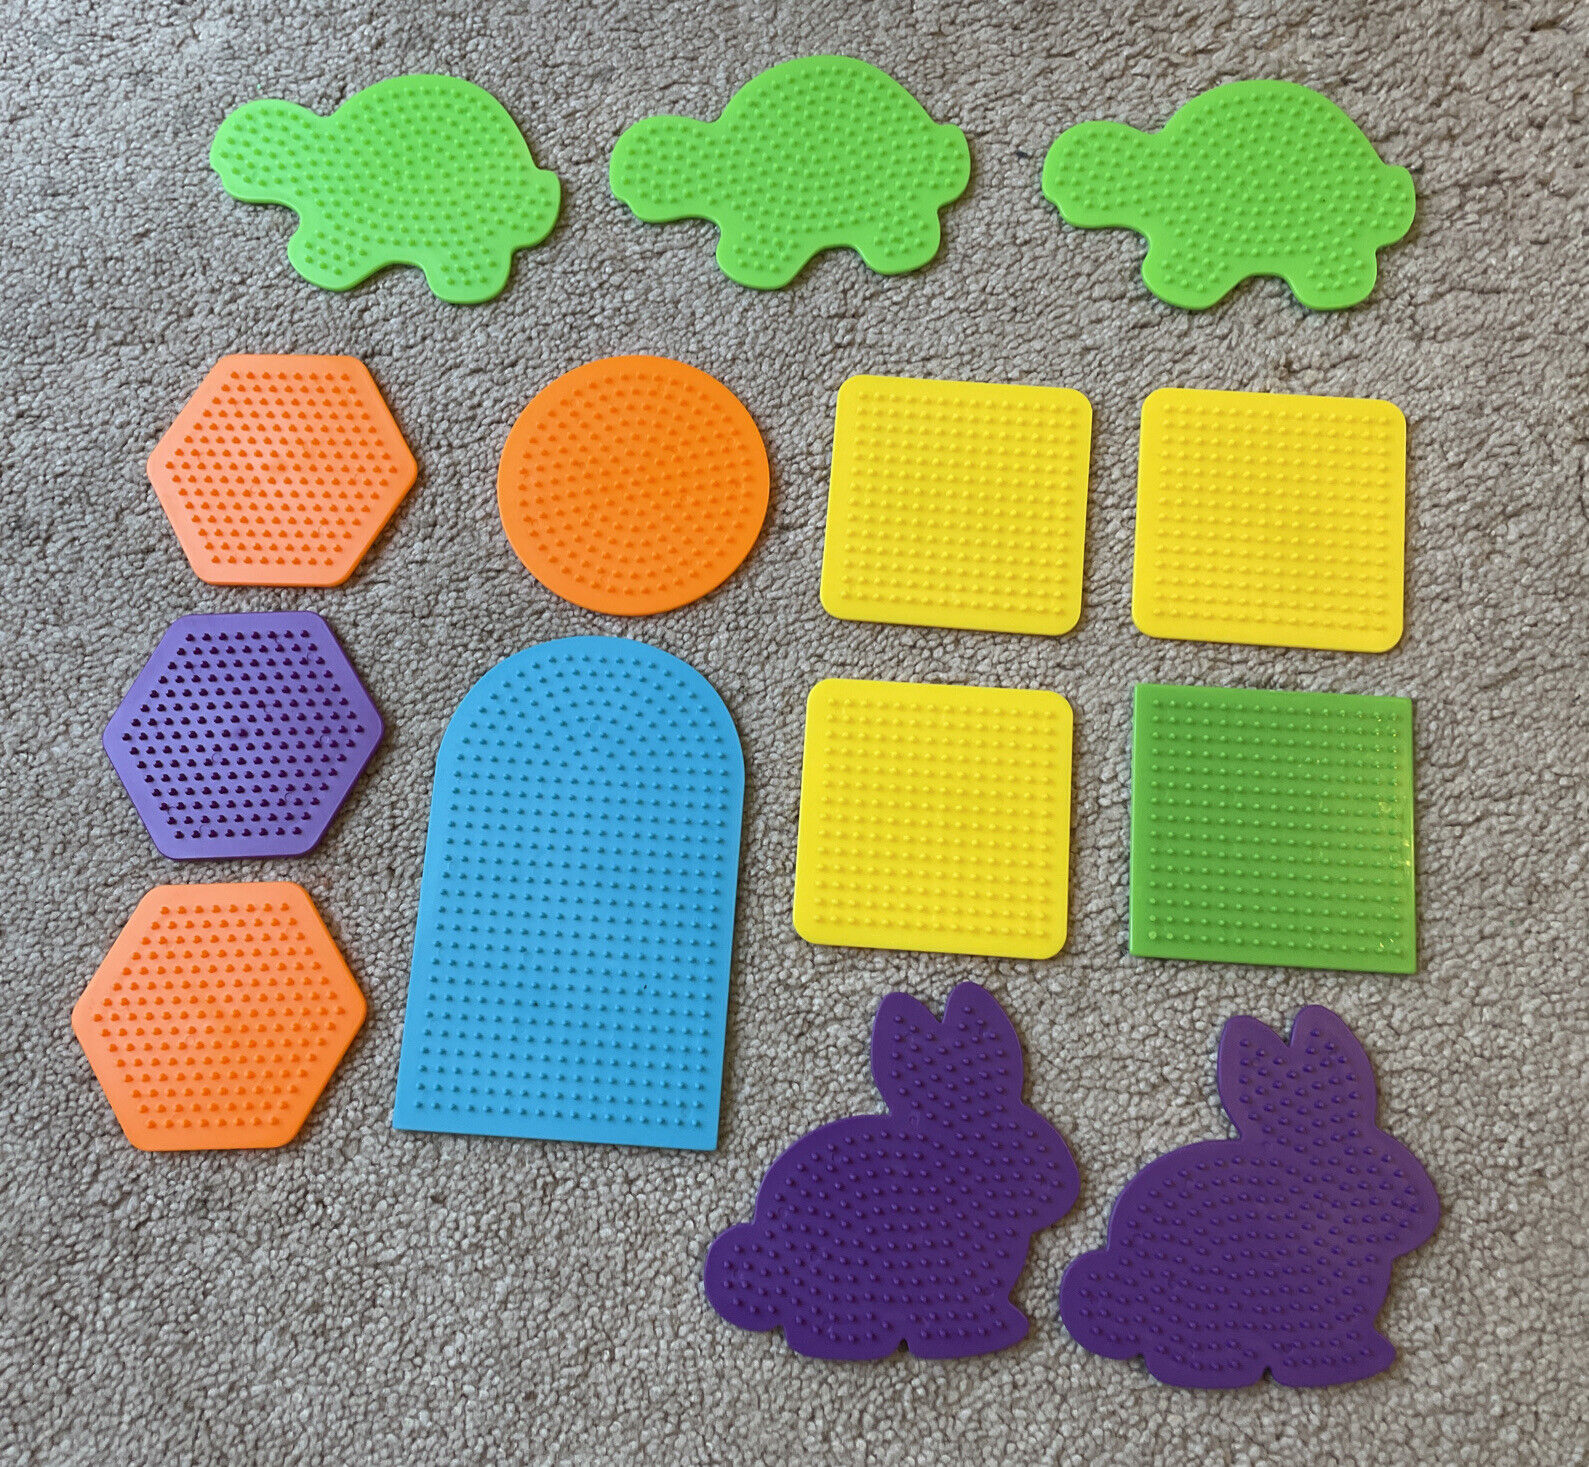 Set of 14 Perler Bead Pegboards In Variety Of Shapes/Sizes